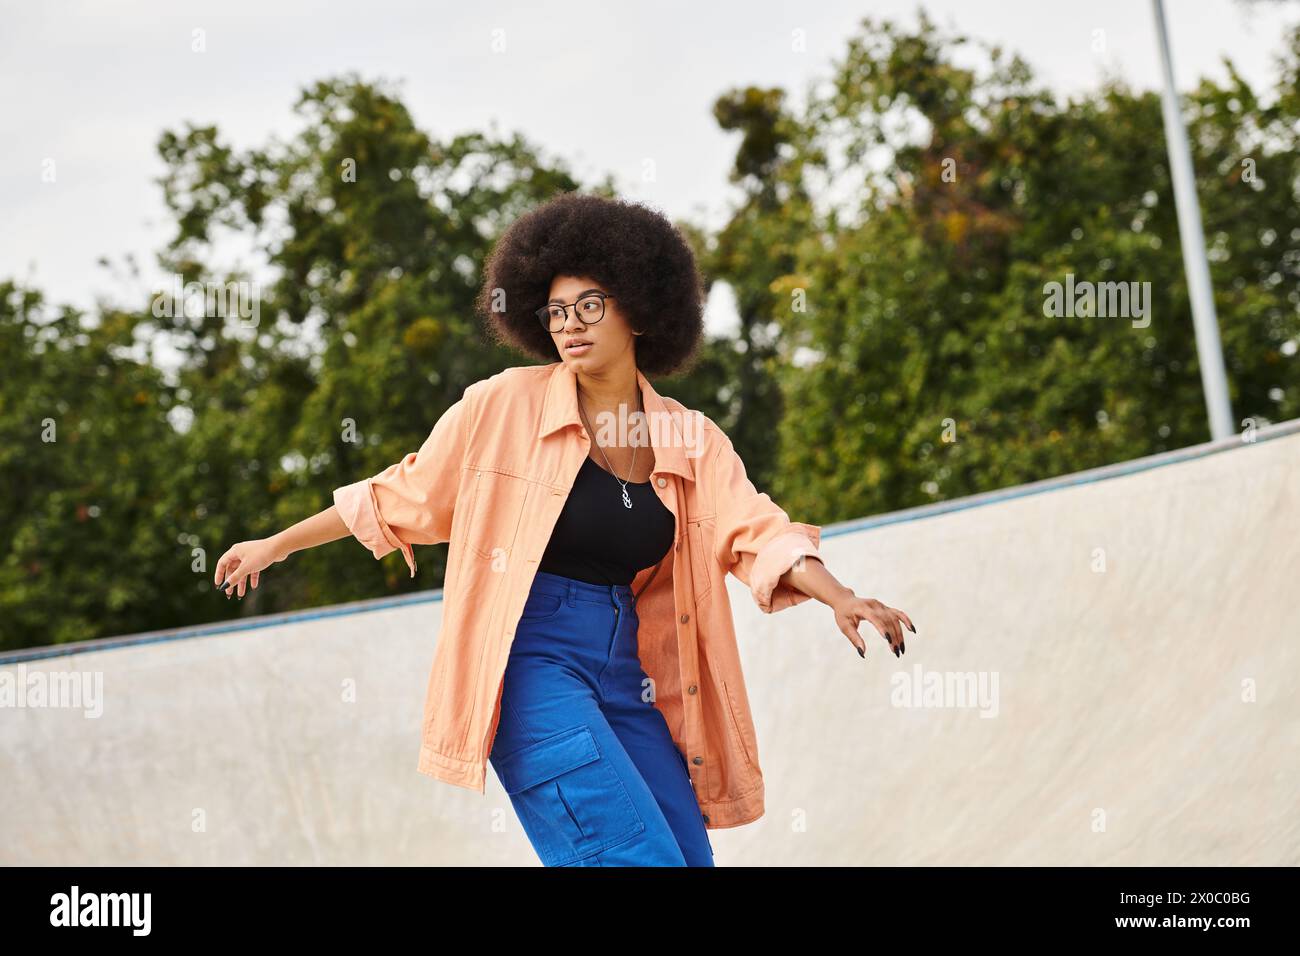 A determined young African American woman with curly hair riding a skateboard up the side of a ramp at an outdoor skate park. Stock Photo